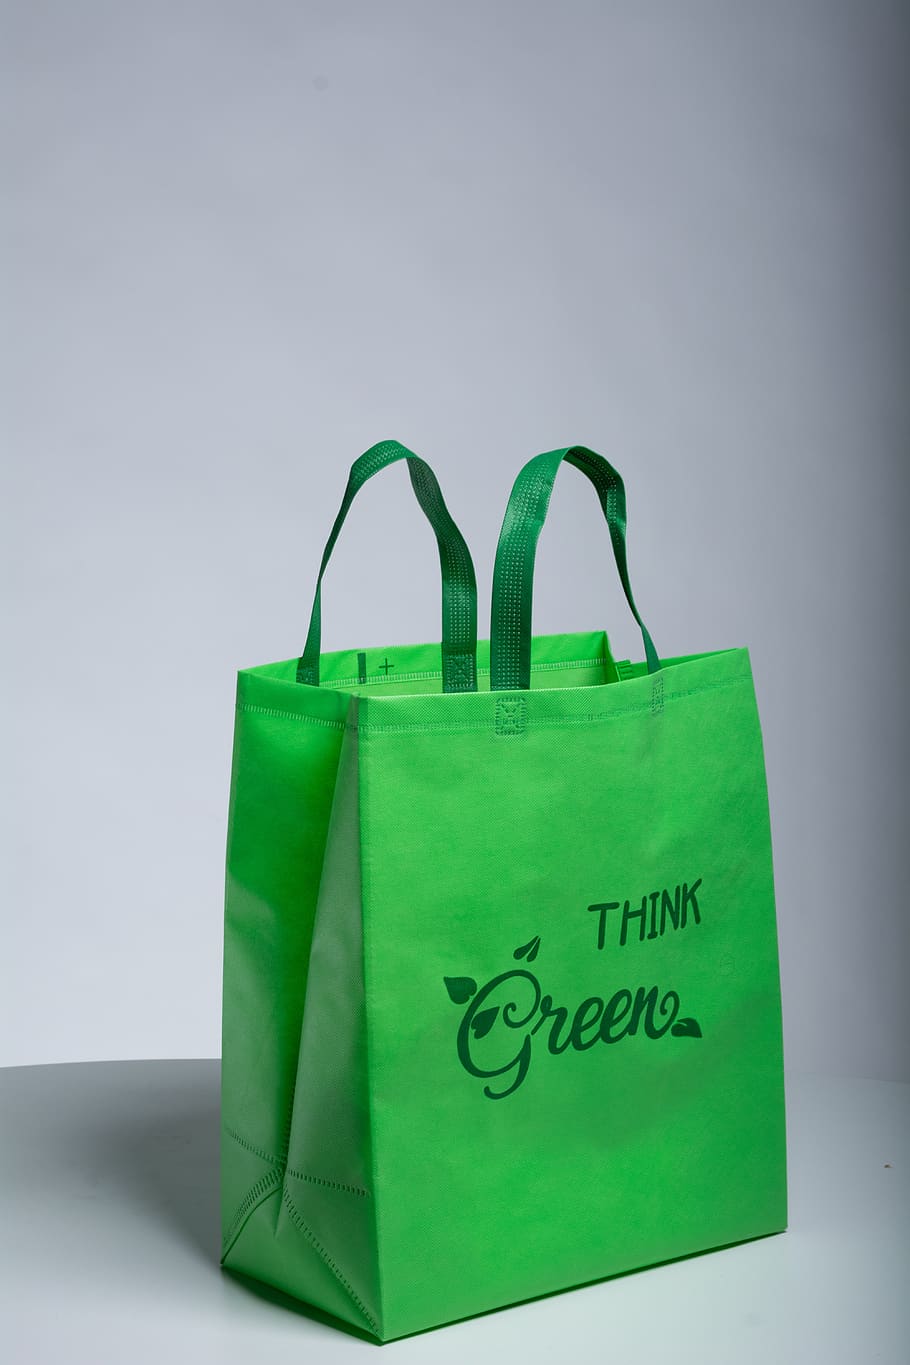 Top 7 Benefits of Choosing Woven Polypropylene Bags for Packaging